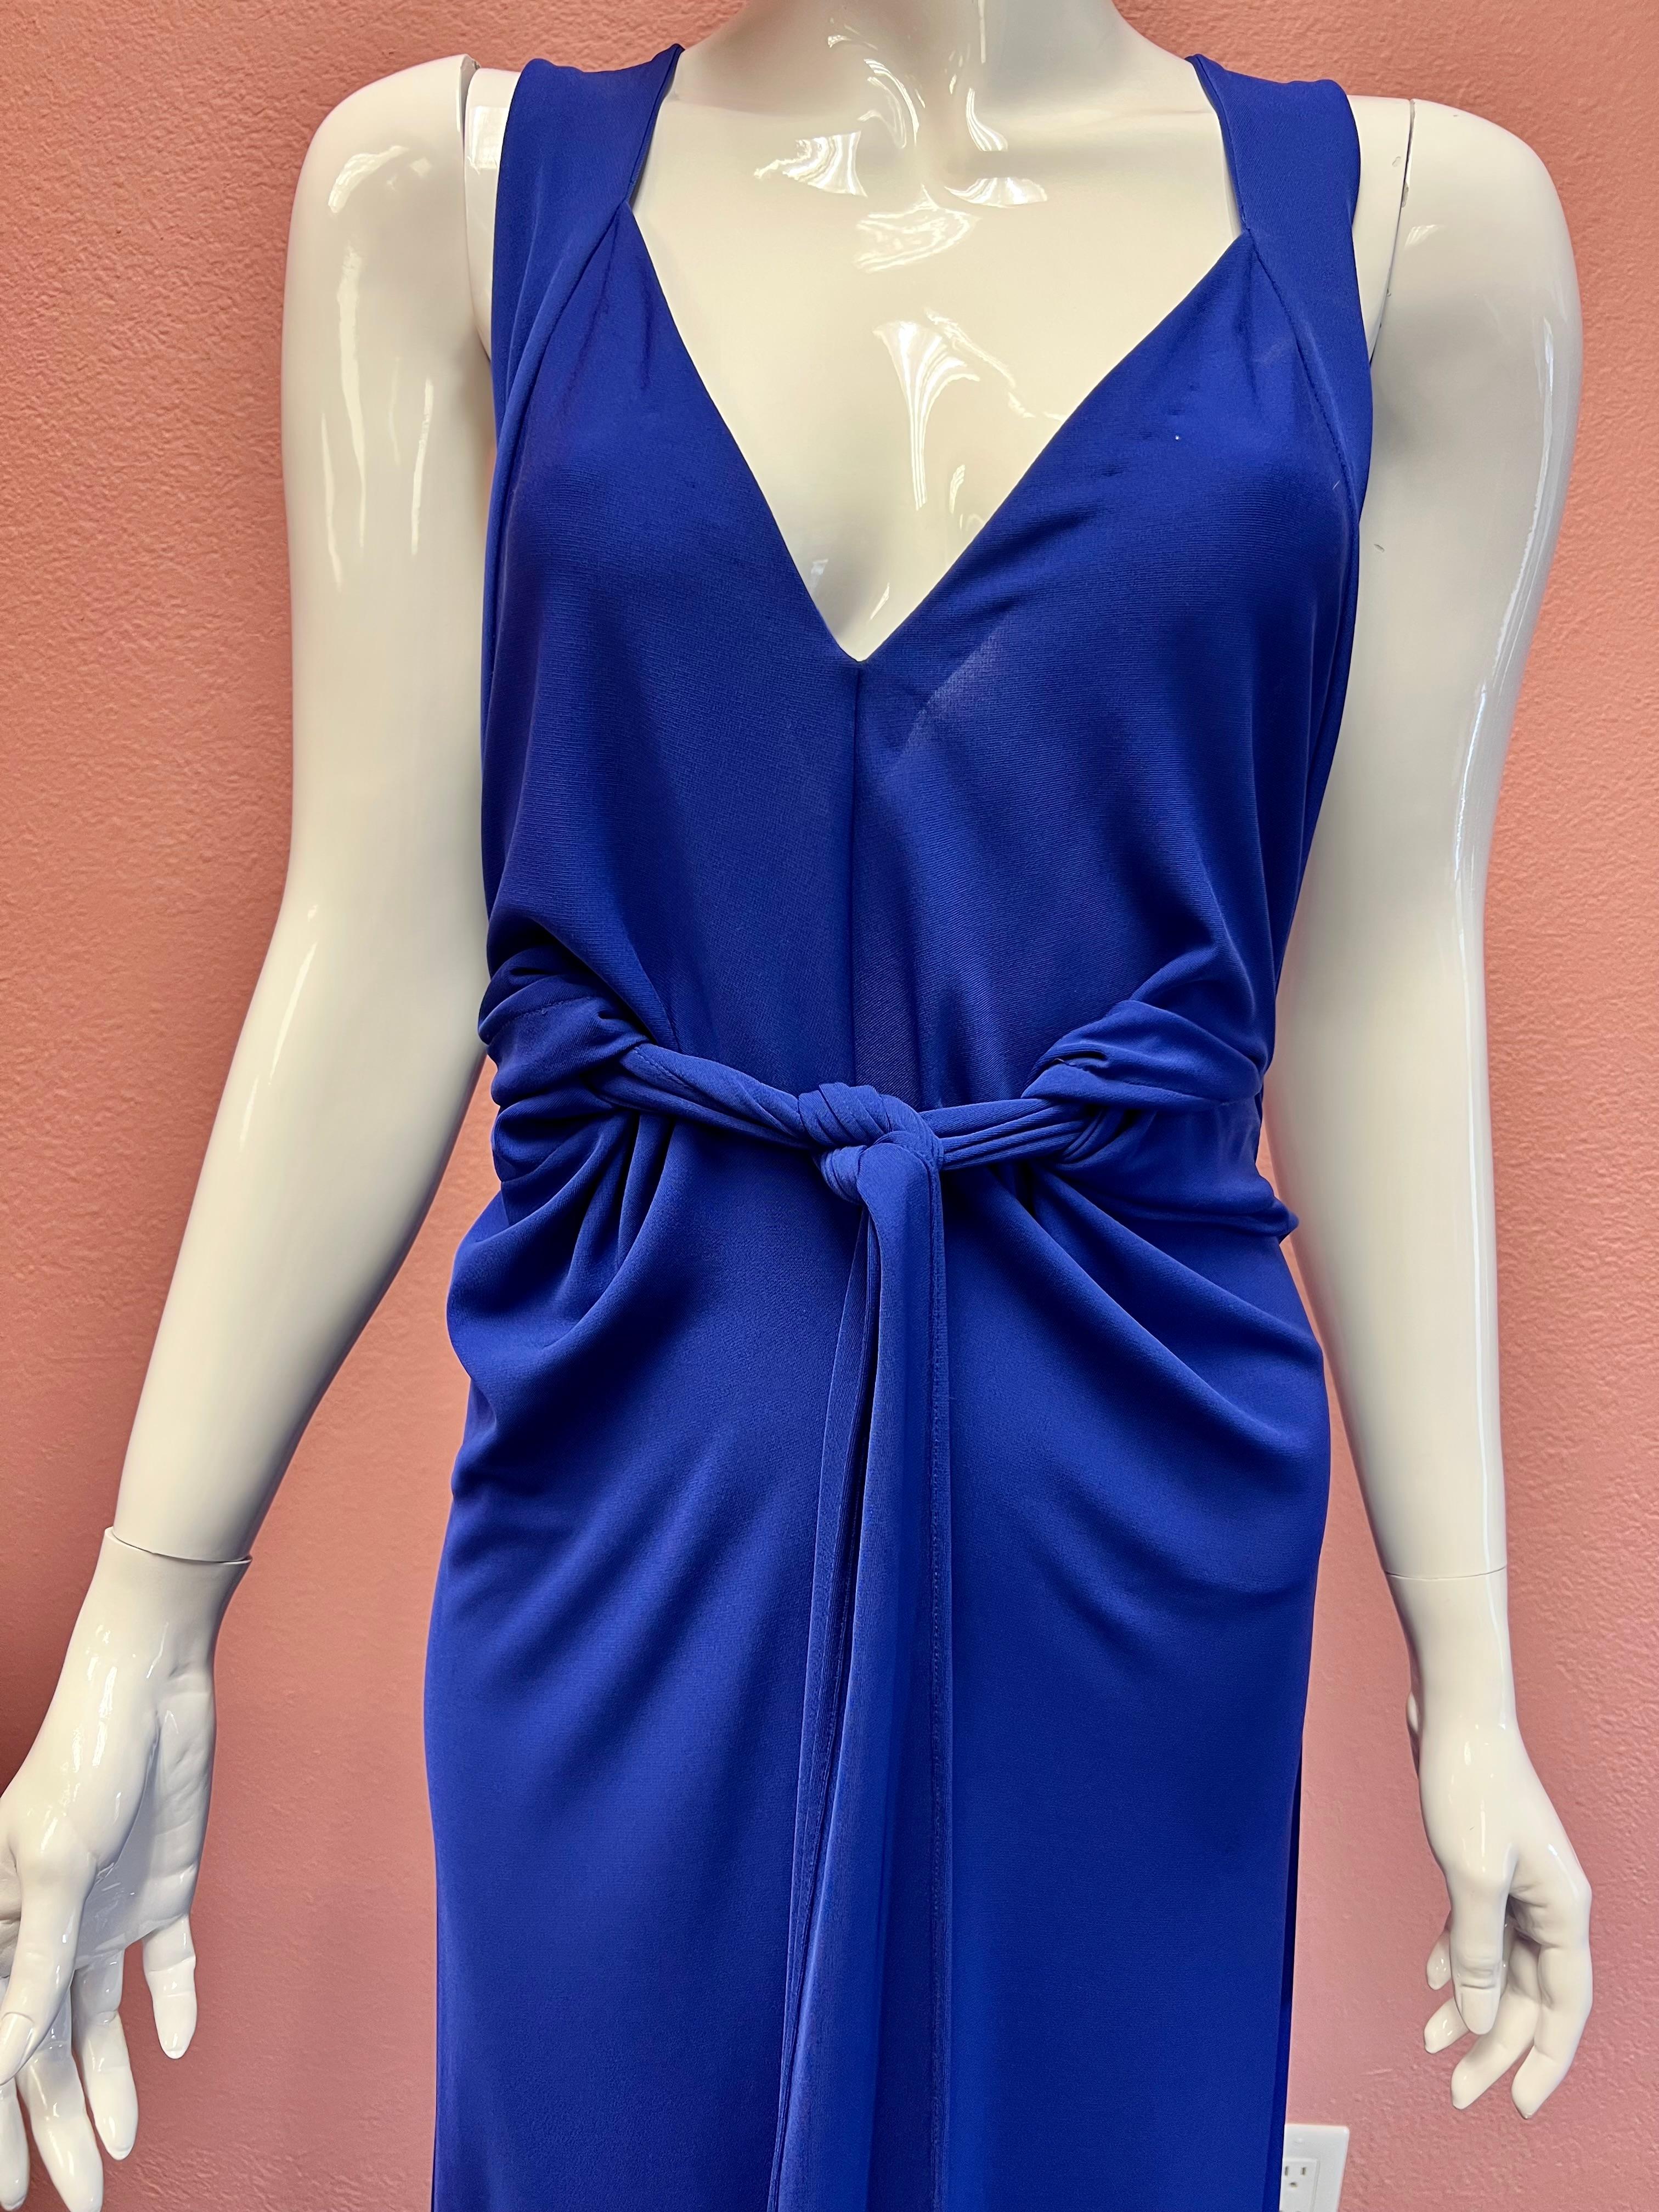 YSL Dress Indigo size 38 In New Condition For Sale In Thousand Oaks, CA